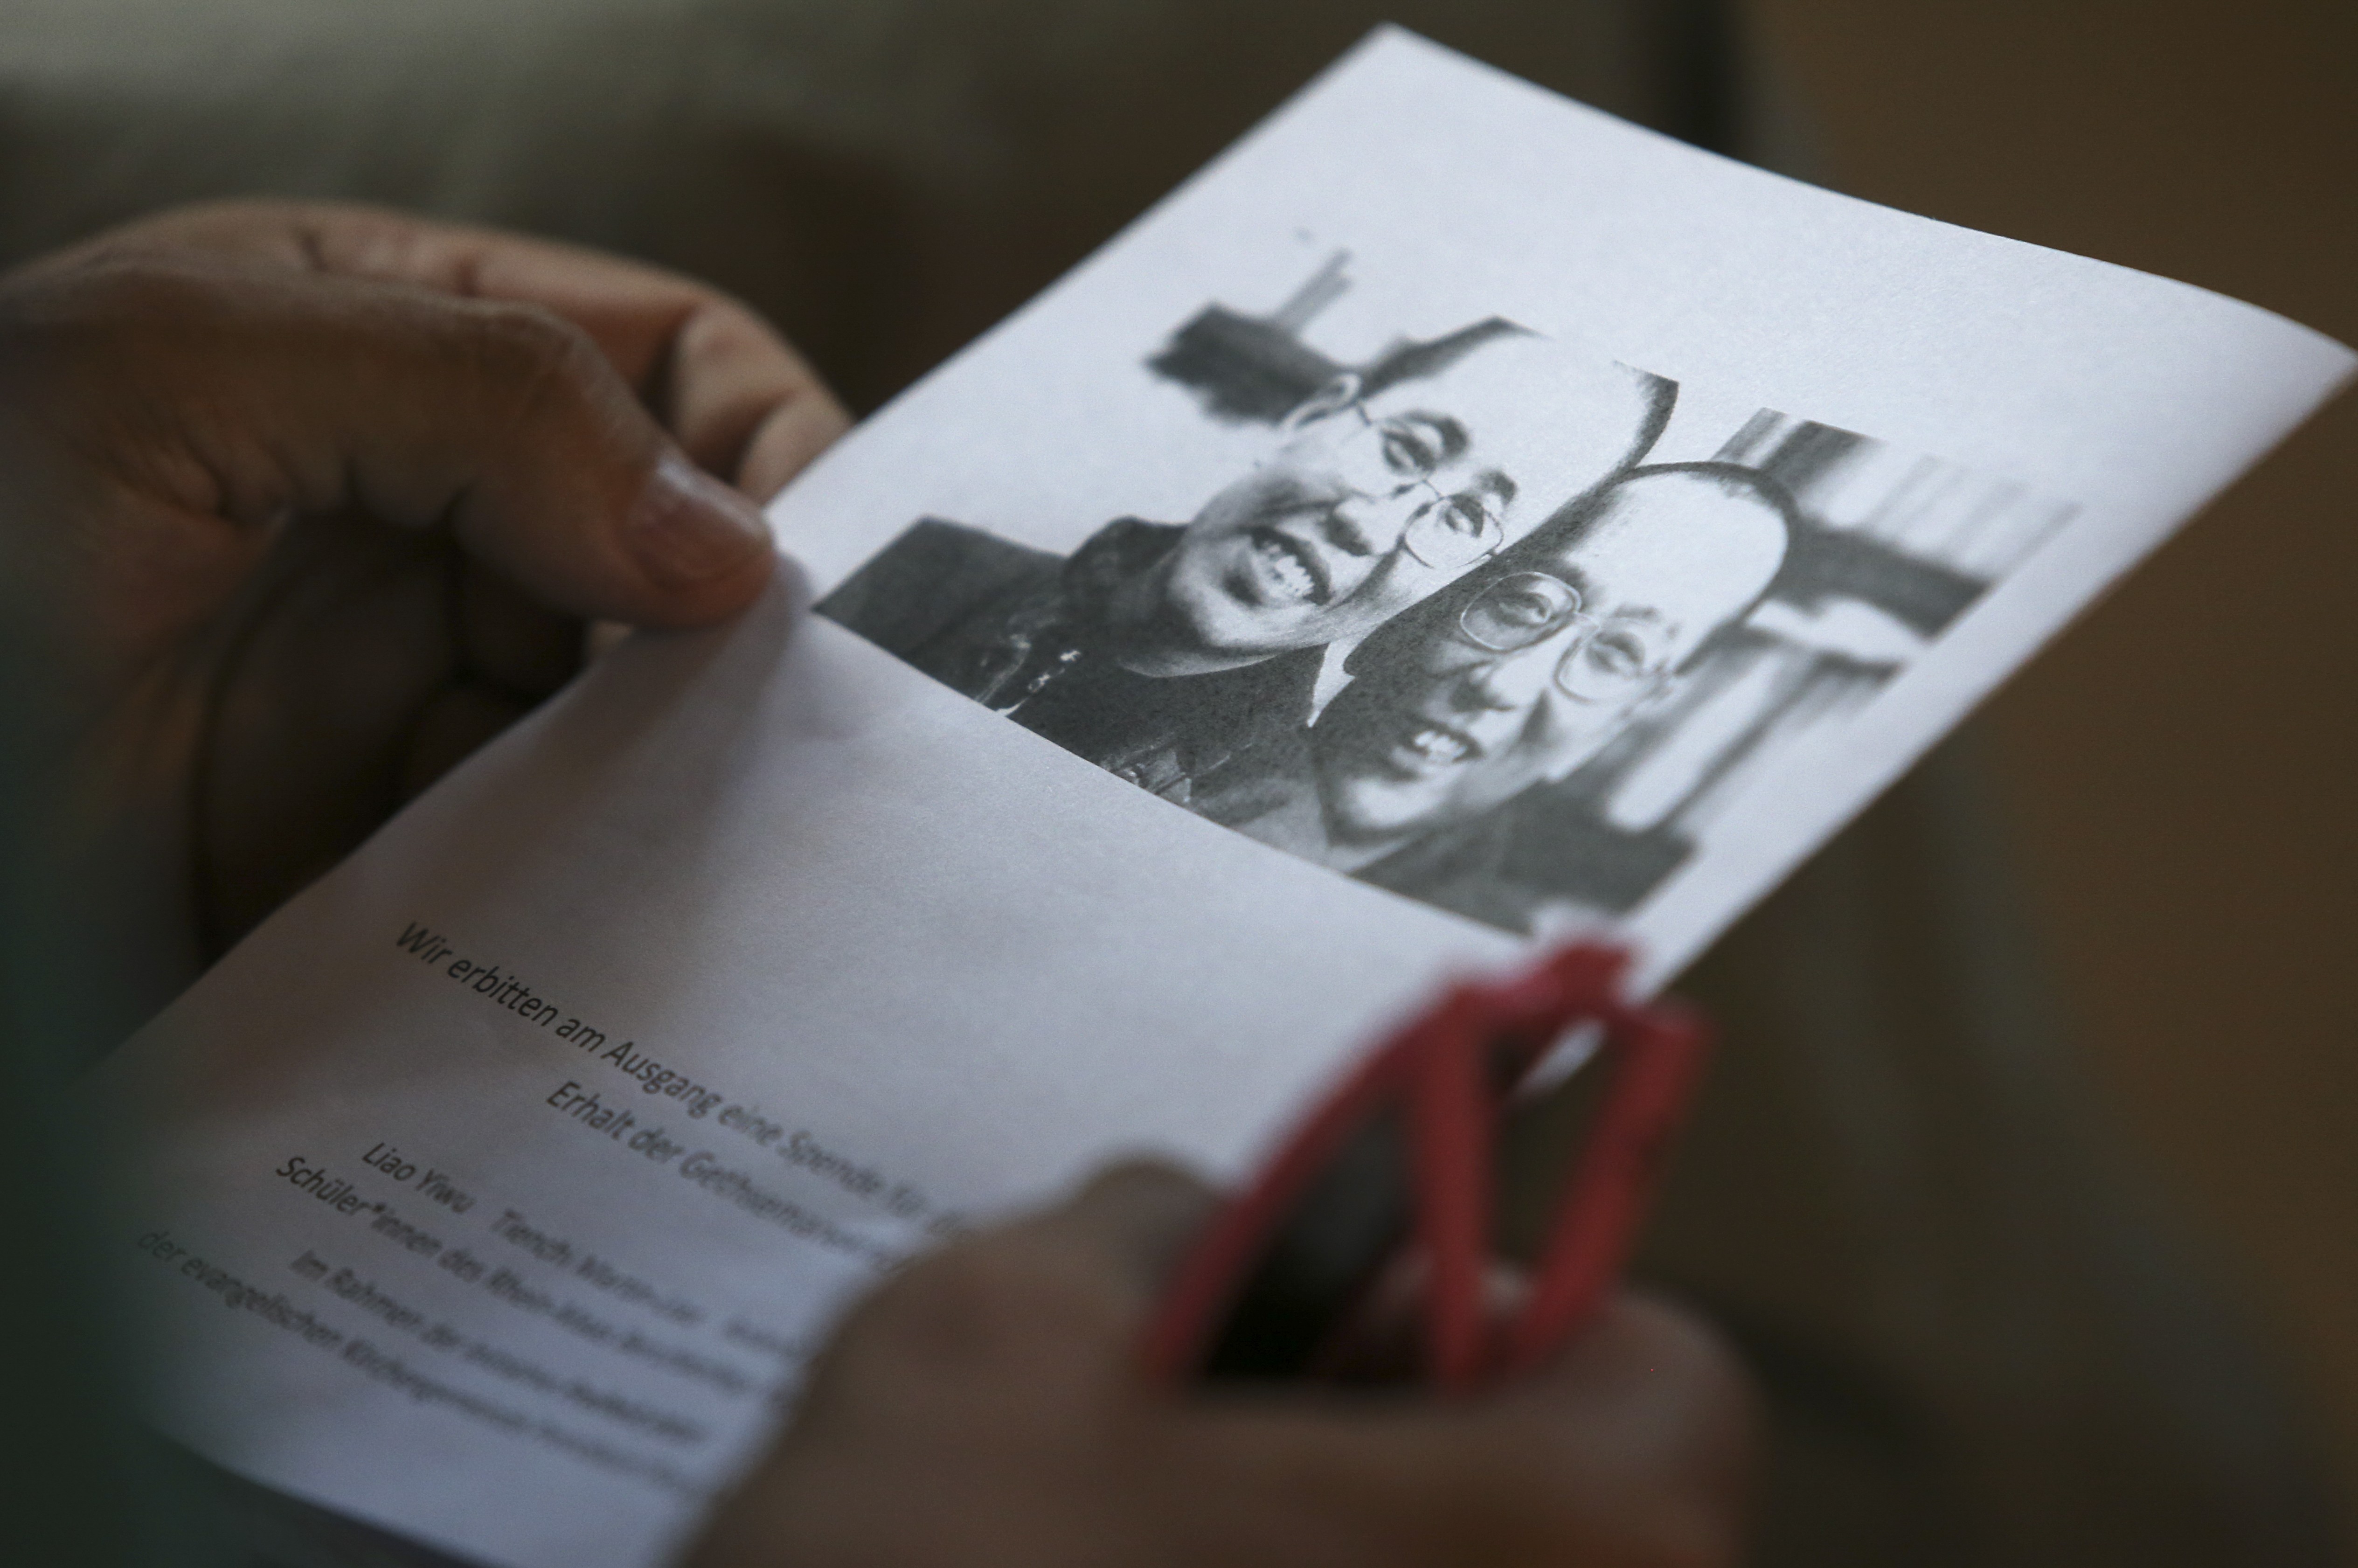 An order of service with a picture of Liu Xiaobo and Liu Xia on the cover. Photo: Sam Tsang